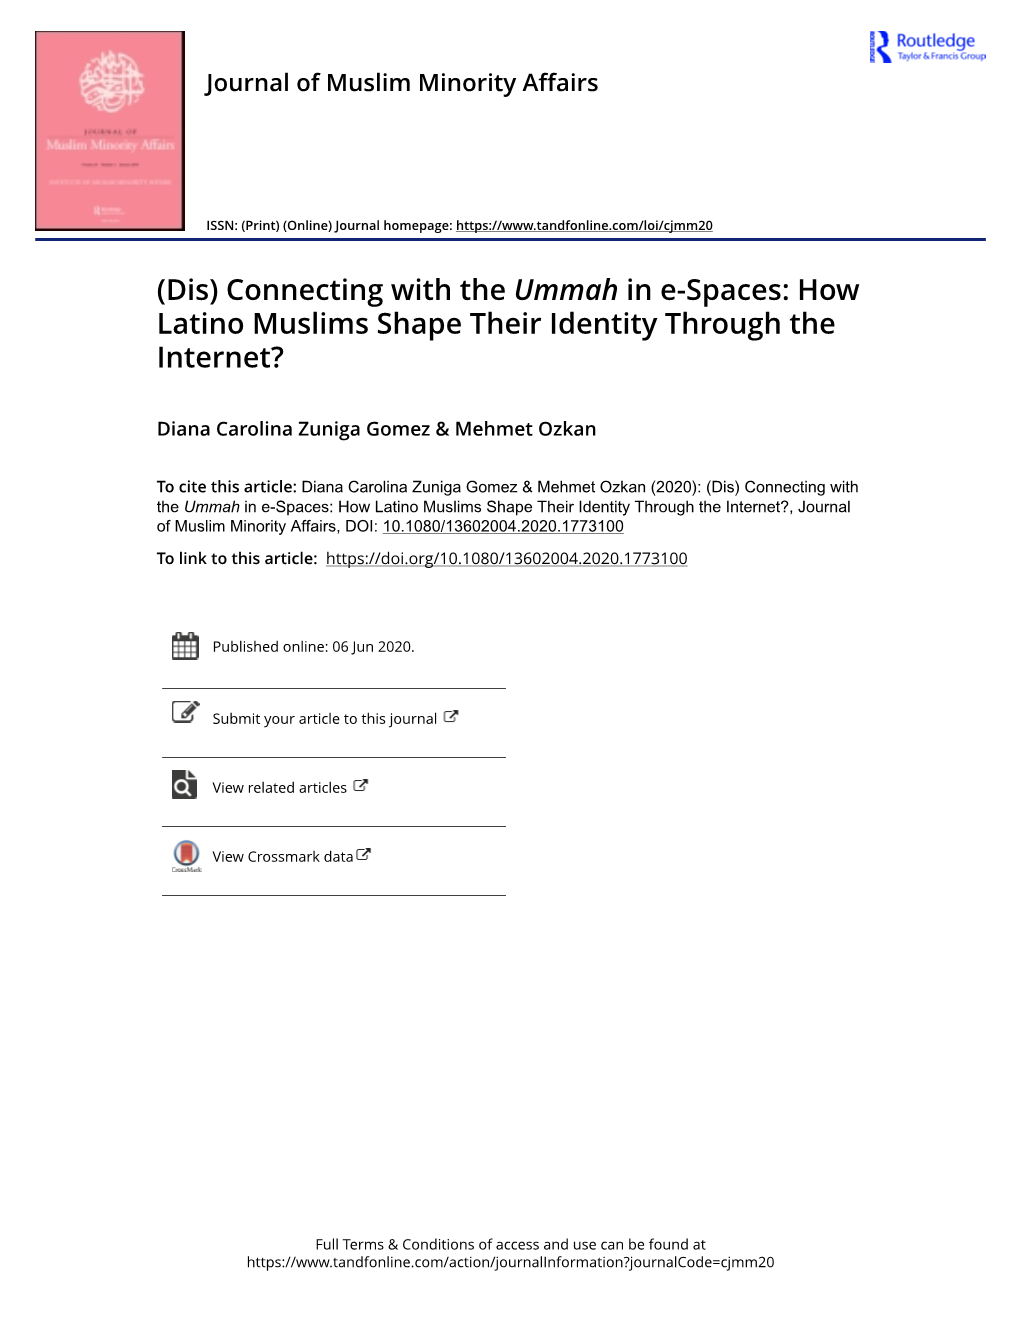 (Dis) Connecting with the Ummah in E-Spaces: How Latino Muslims Shape Their Identity Through the Internet?